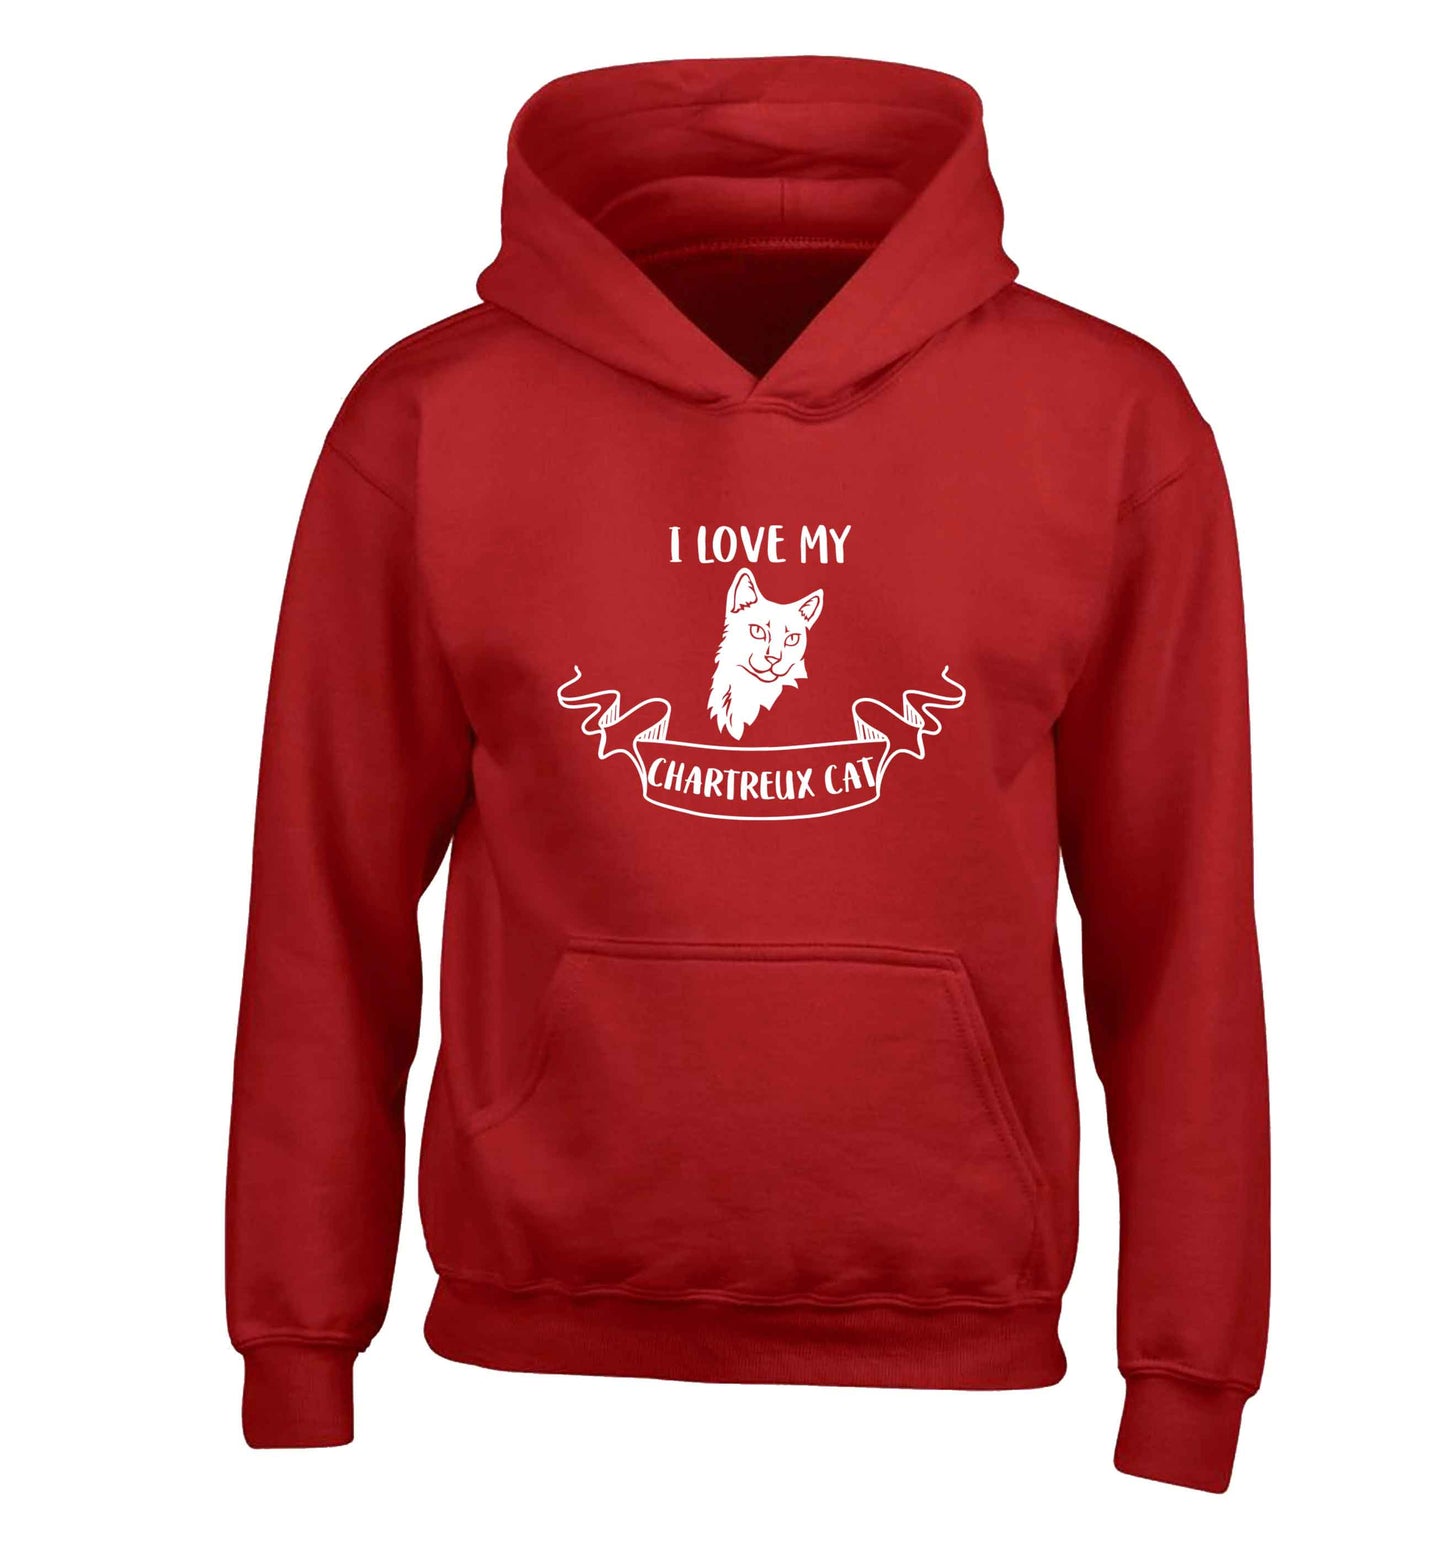 I love my chartreux cat children's red hoodie 12-13 Years